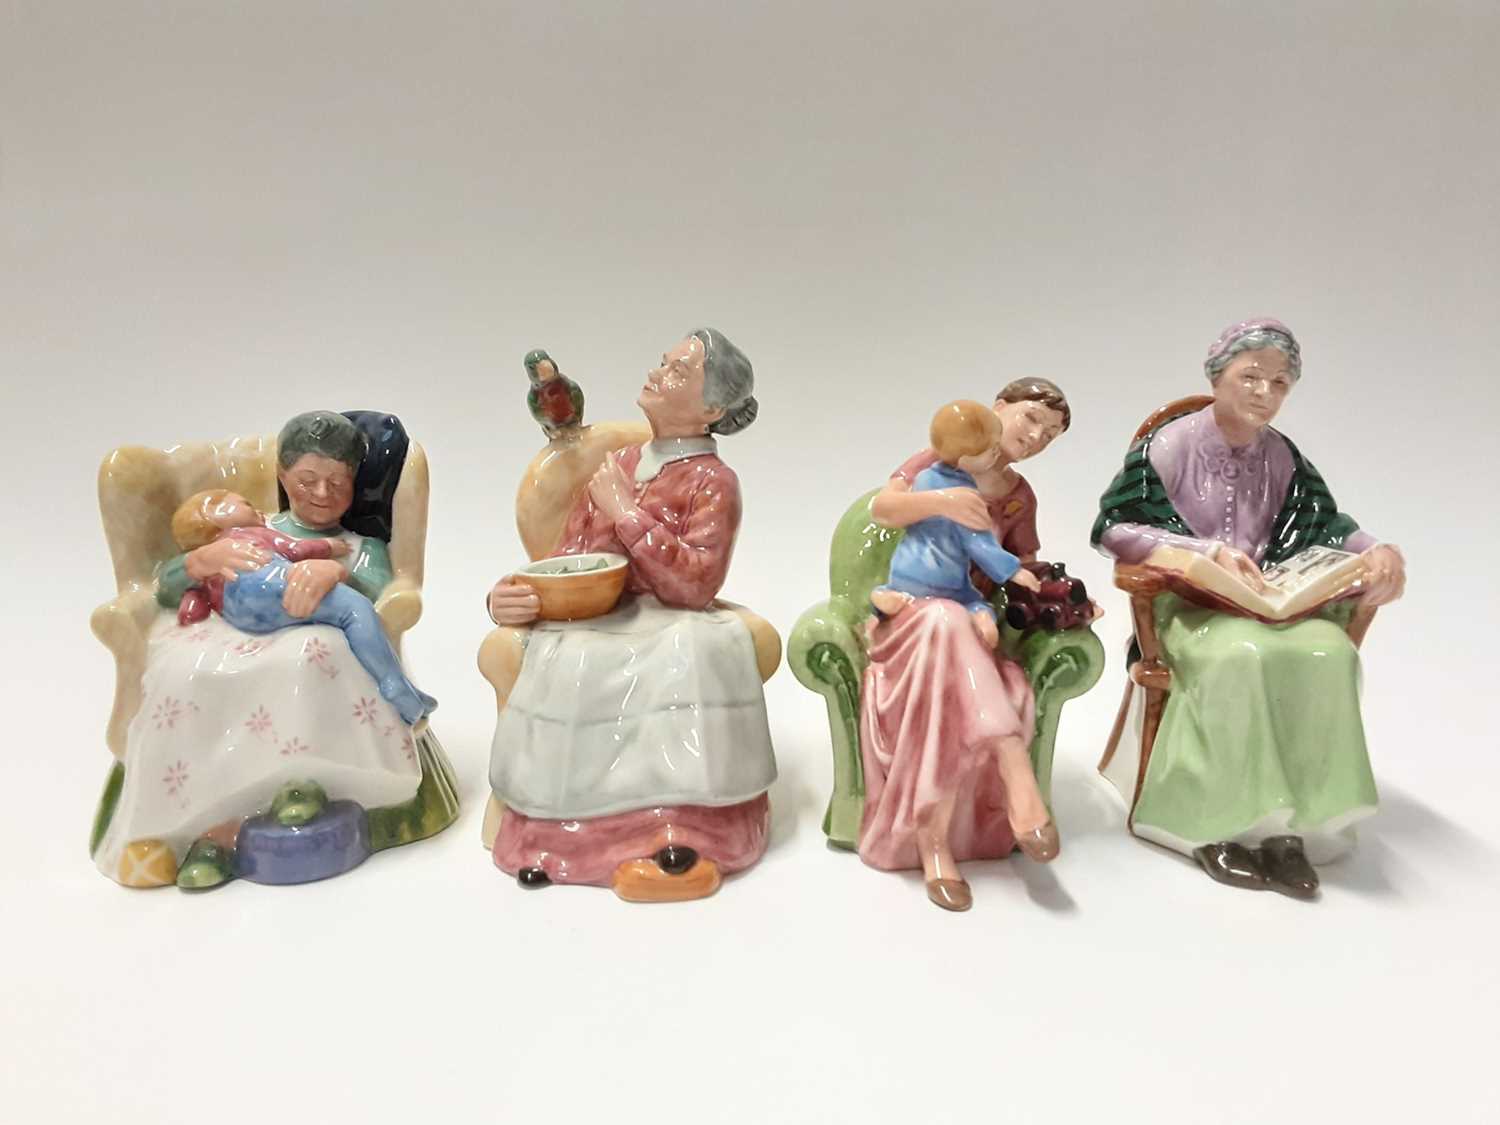 Lot 70 - Four Royal Doulton figures - The Family Album HN2321, When I Was Young HN3457, Pretty Polly HN2768 and Sweet Dreams HN2380